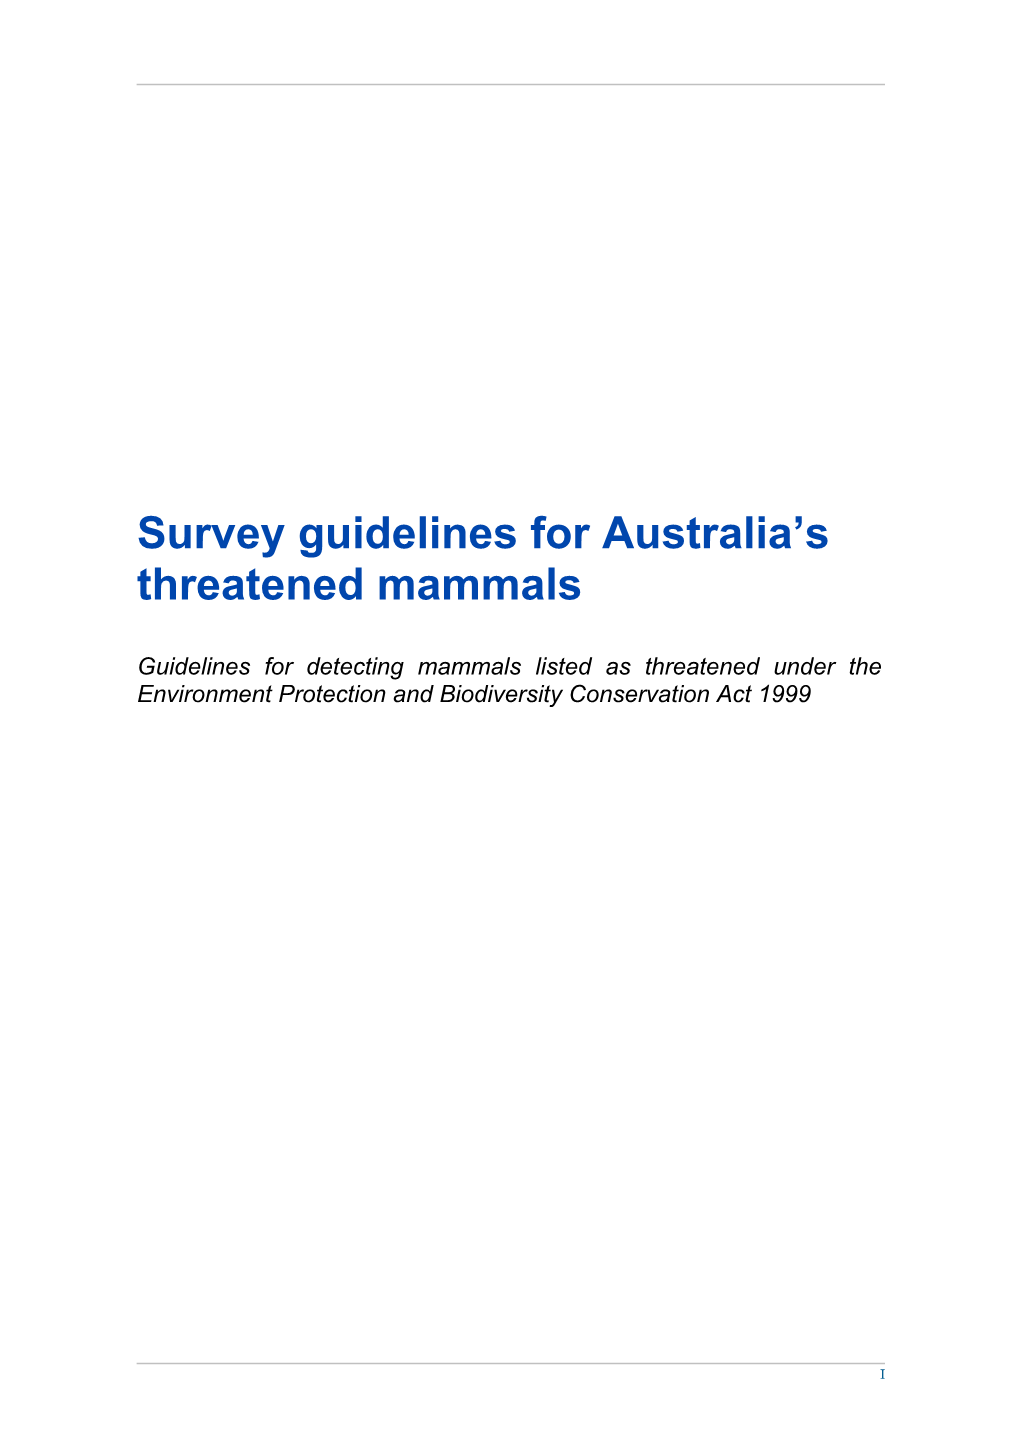 Survey Guidelines for Australia S Threatened Non-Flying Mammals